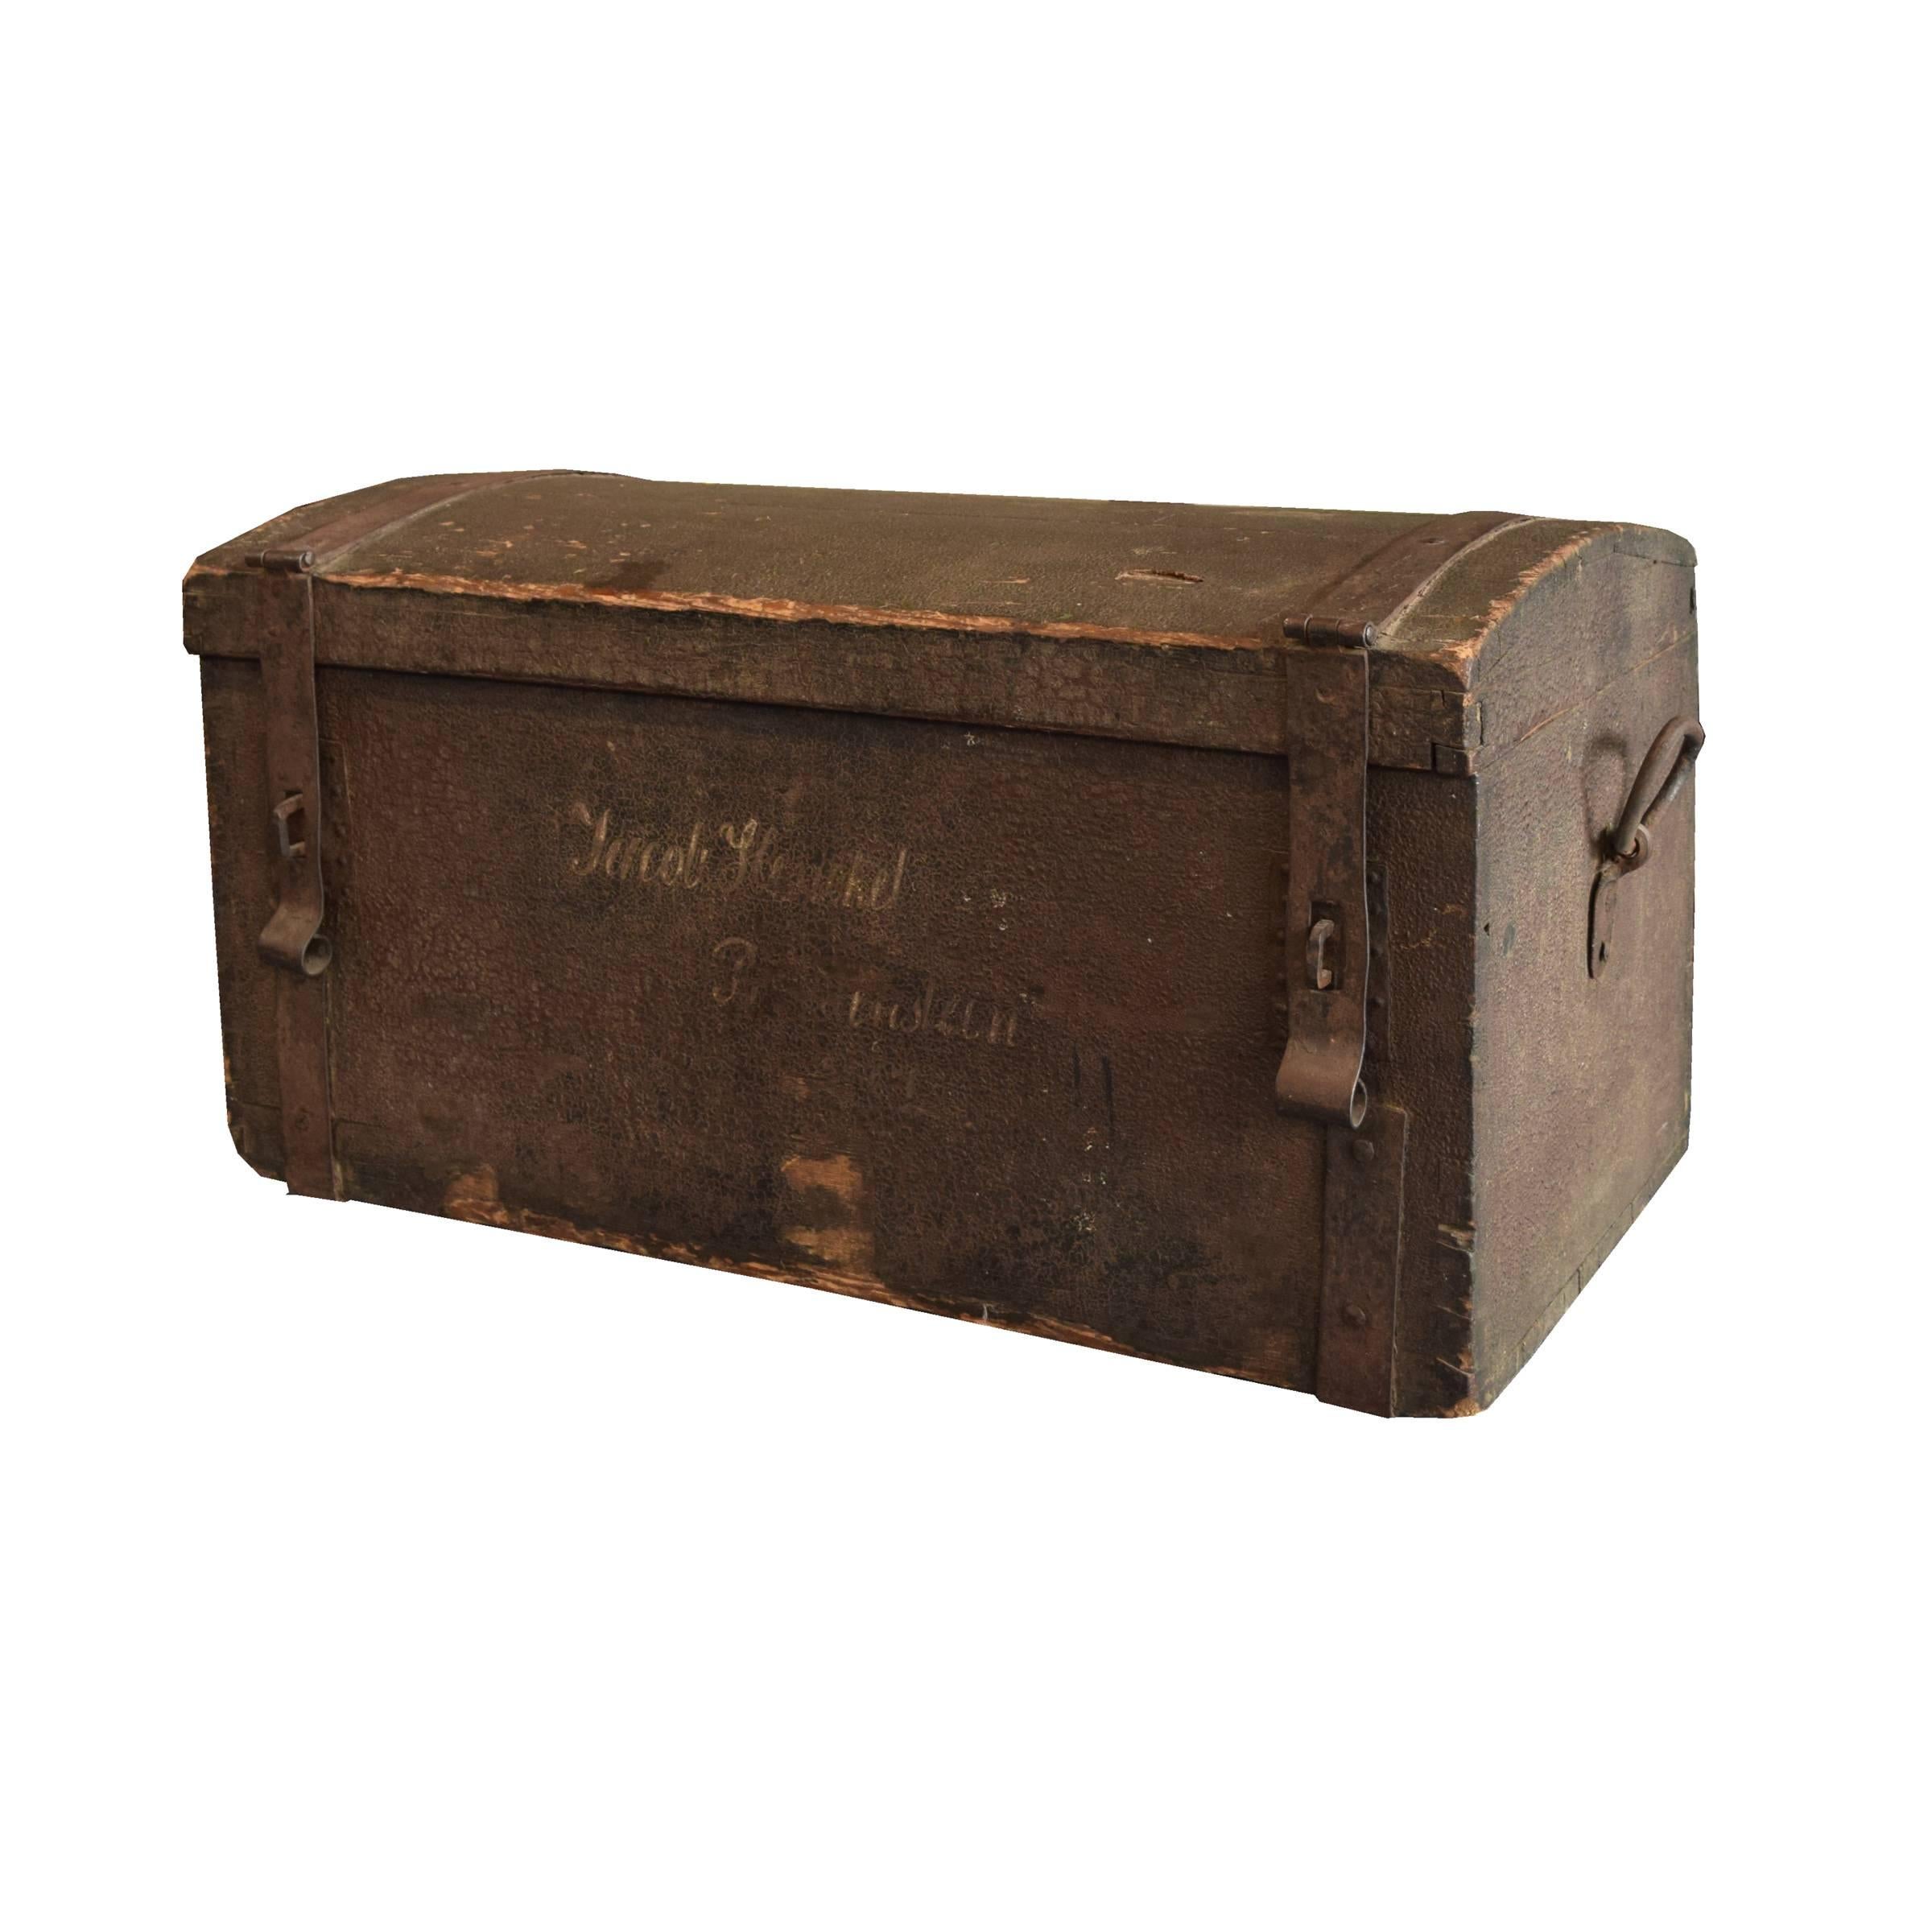 A European wood trunk with a beautiful patina and great iron straps and handles, circa 1900.